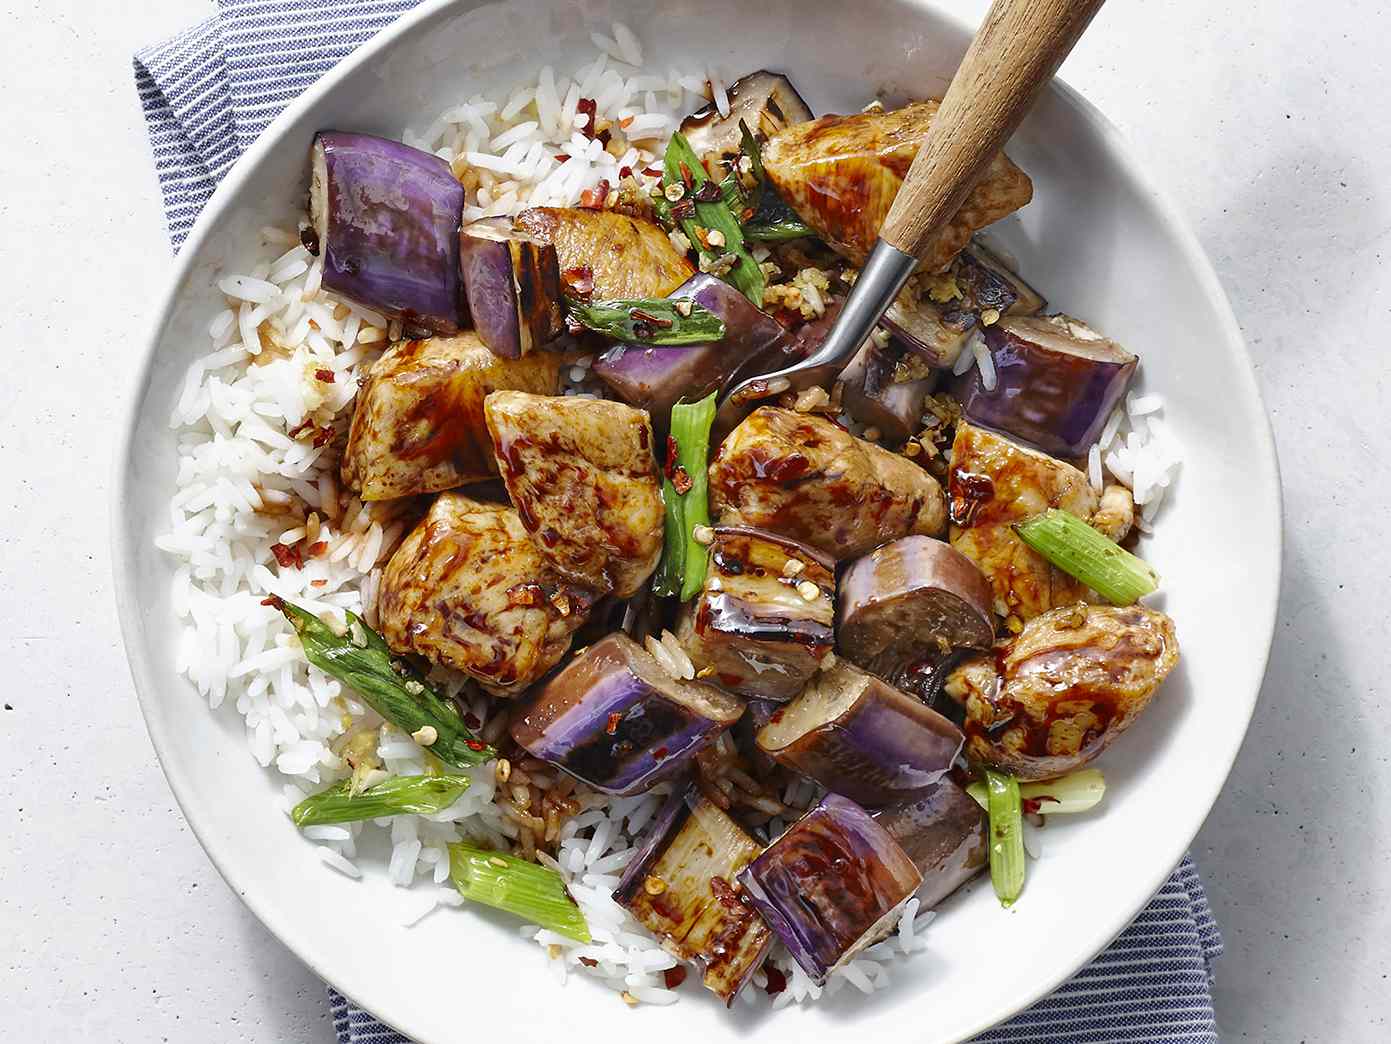 Spicy Chicken and Eggplant Stir-Fry